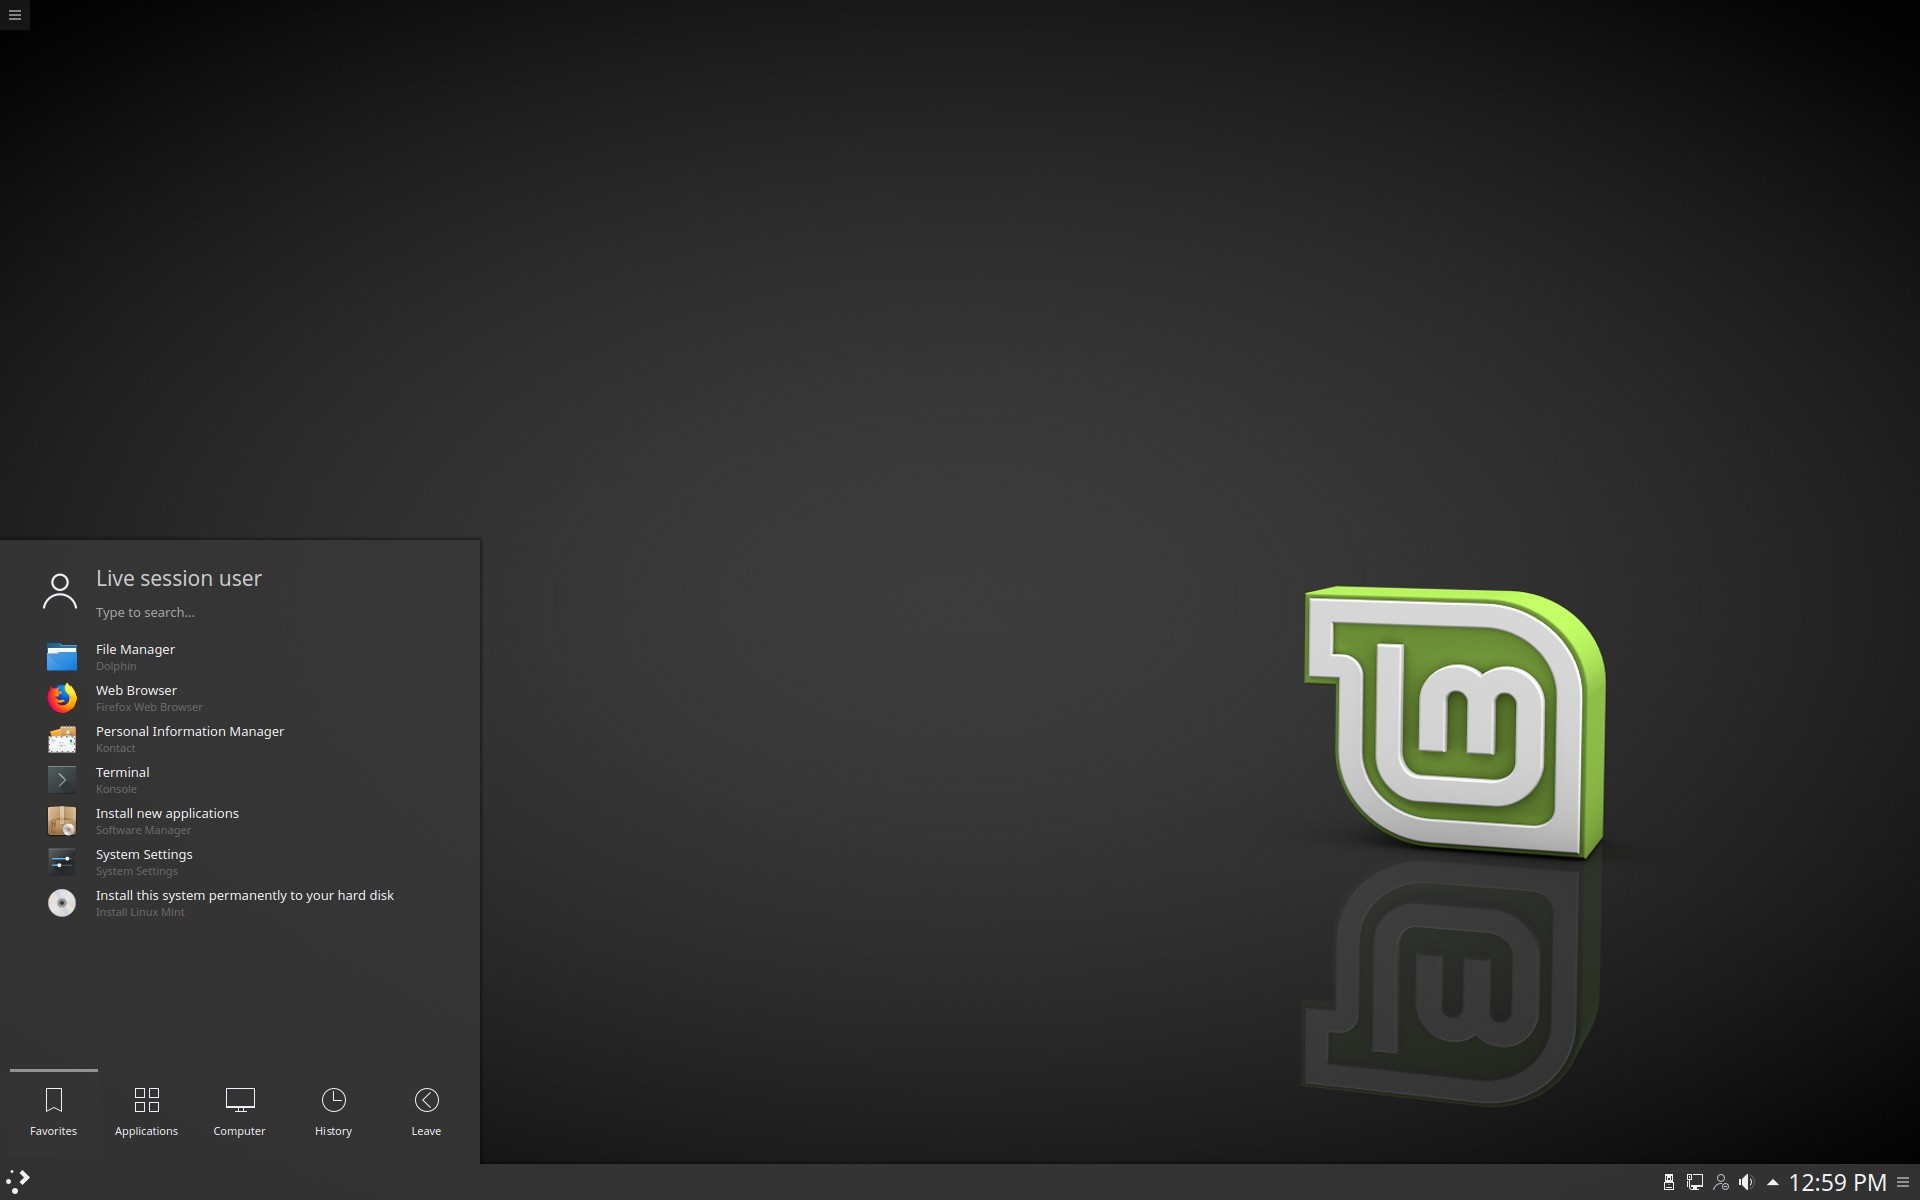 linux-mint-18-3-sylvia-kde-and-xfce-editions-officially-released-download-now-519005-2.jpg